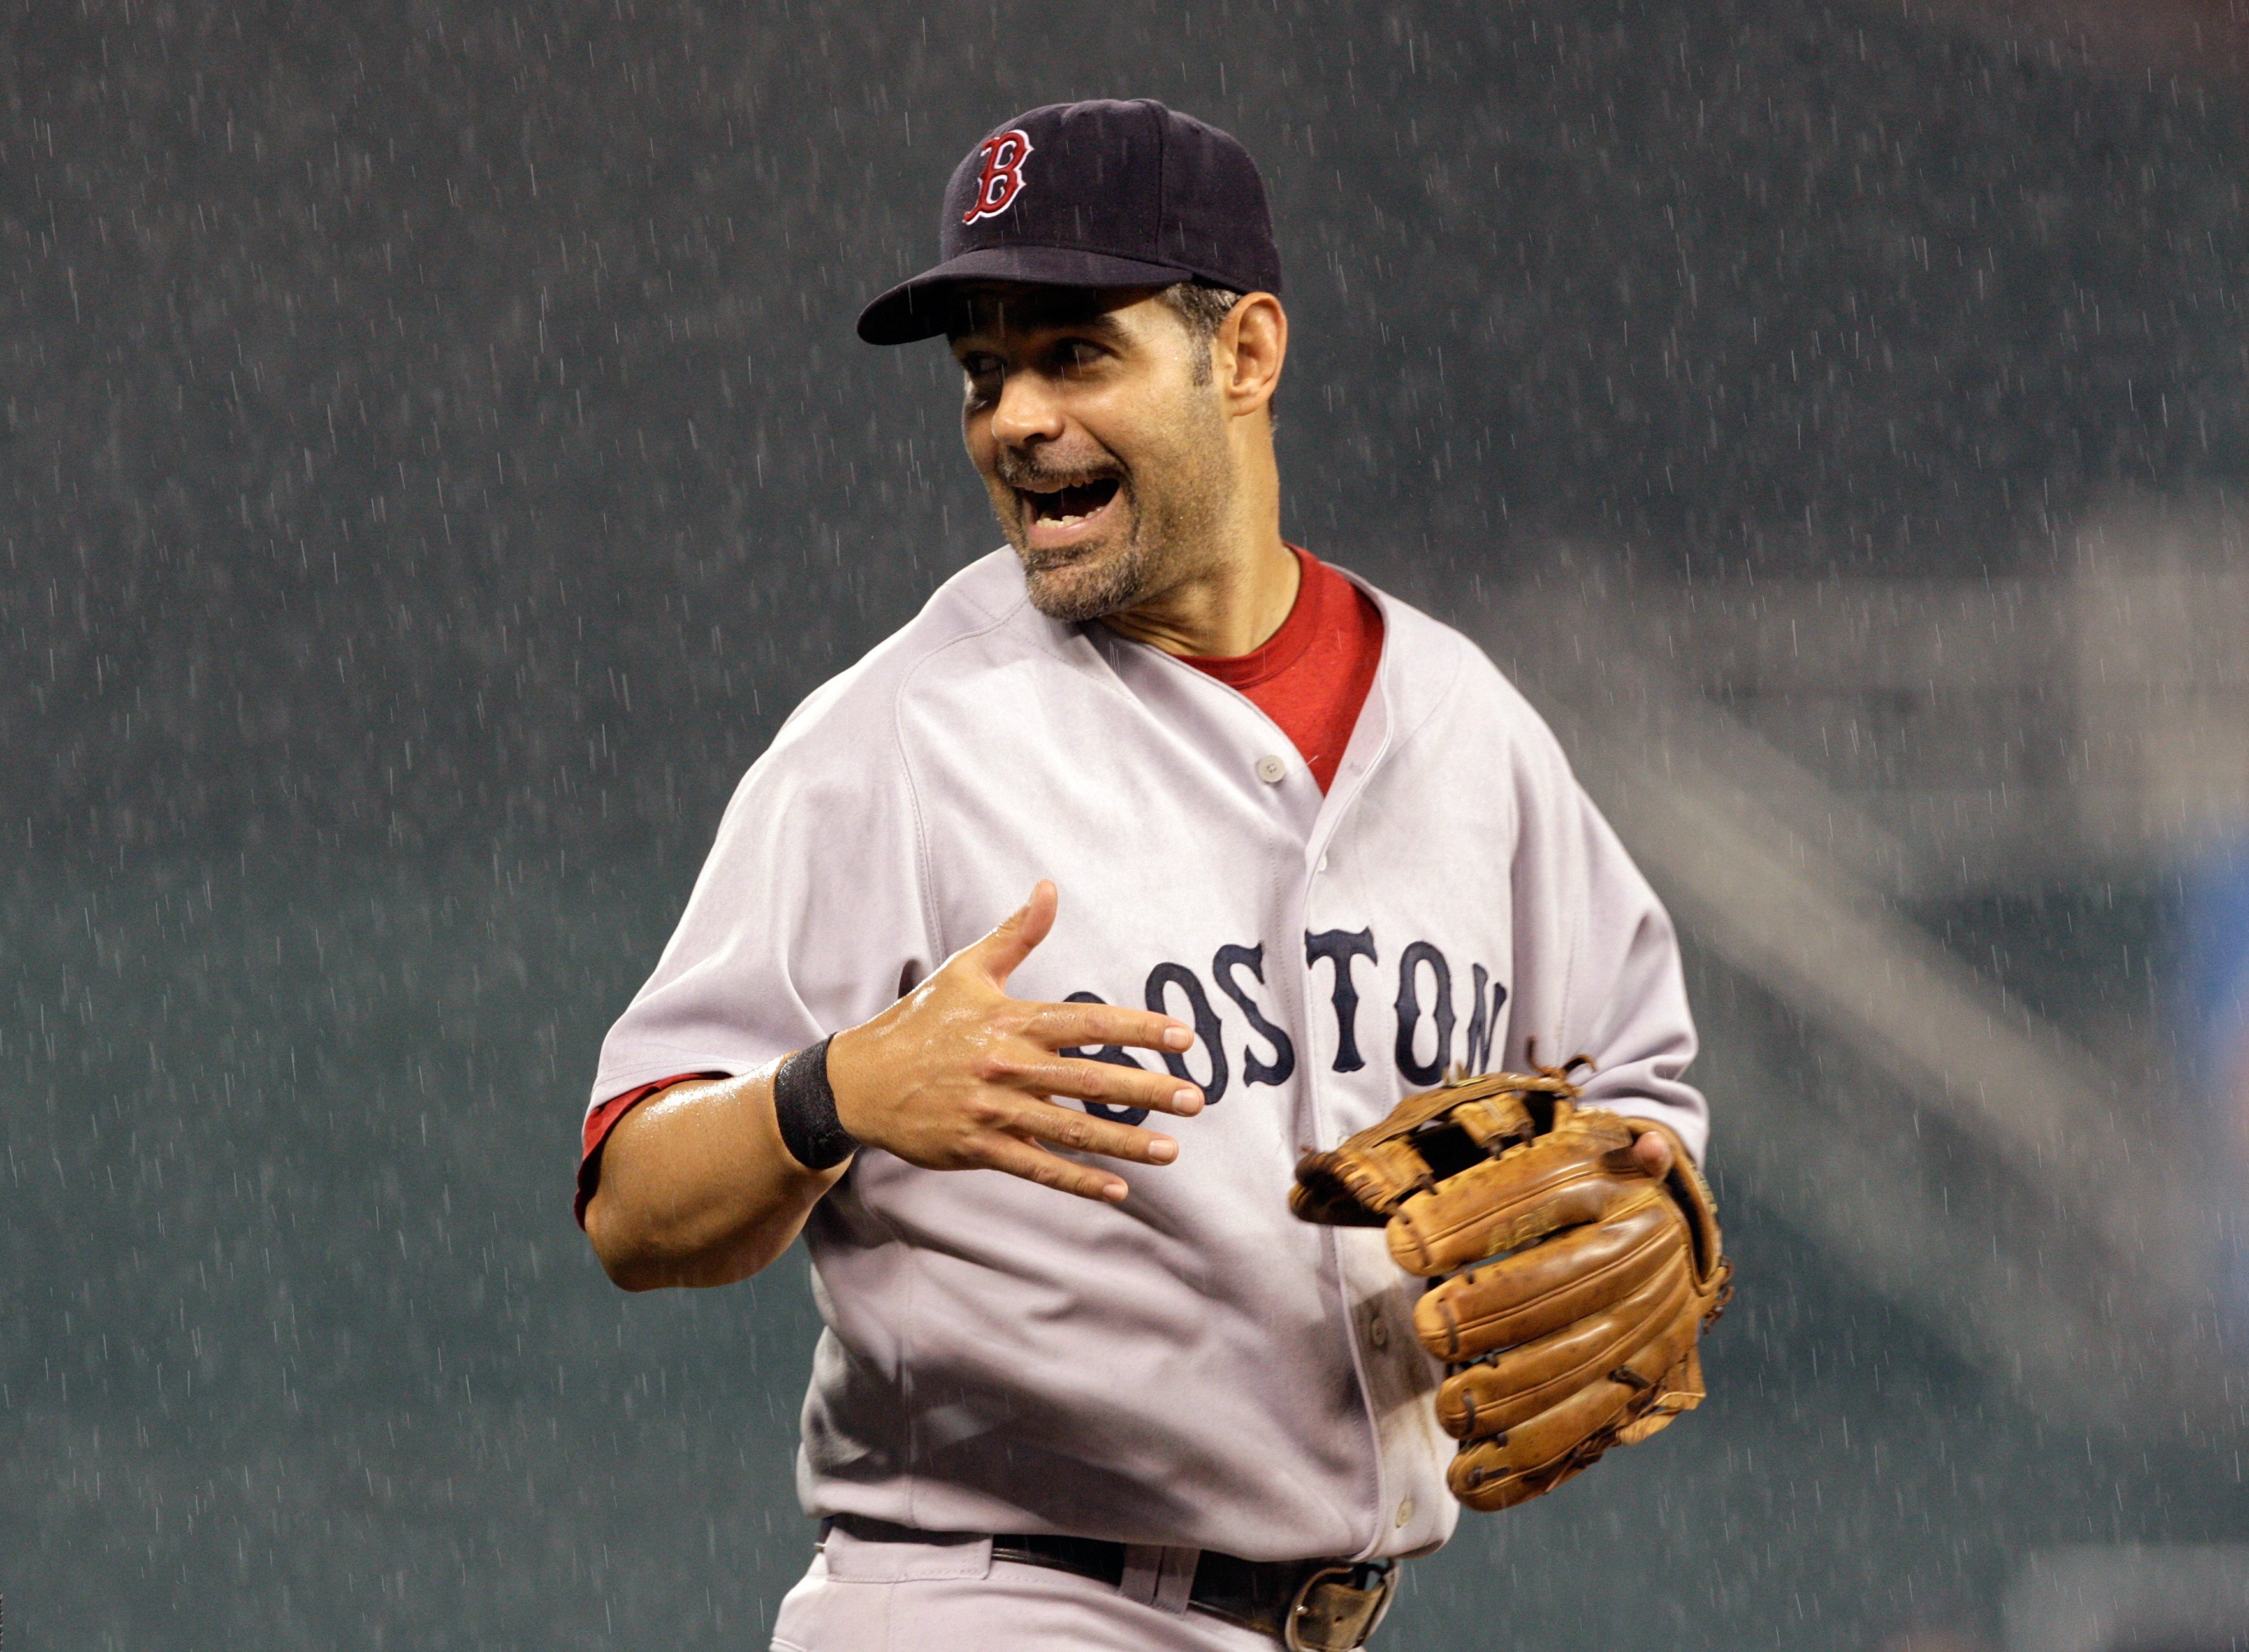 Red Sox Stats on X: Nice to have Mike Lowell back in a Sox uni